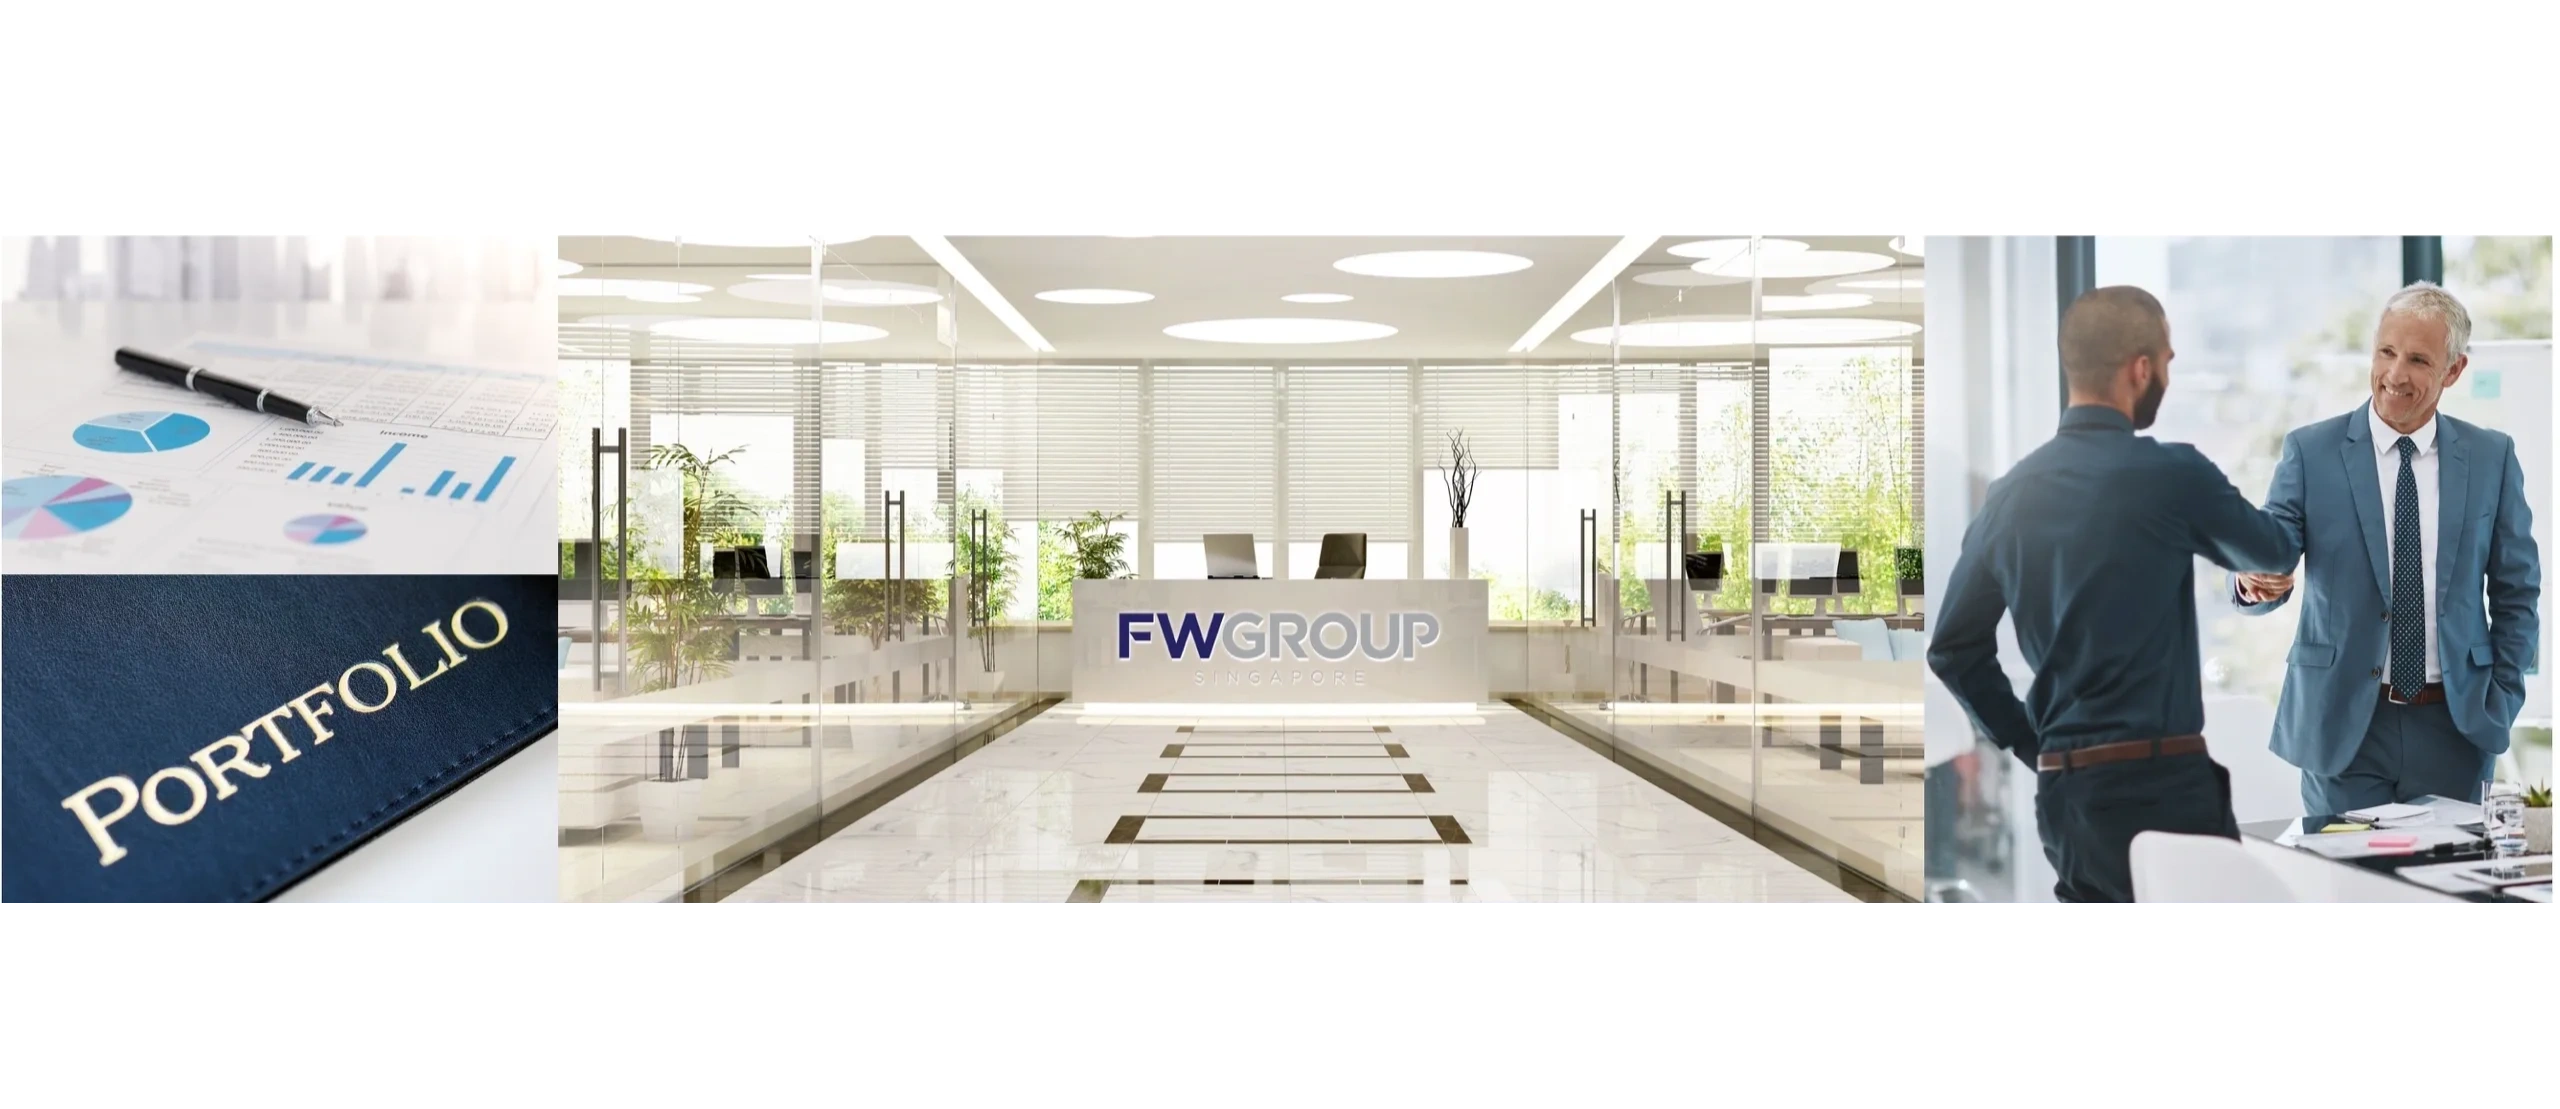 Visit FW Group Singapore for advice on investments, pensions, life insurance, estate planning and in